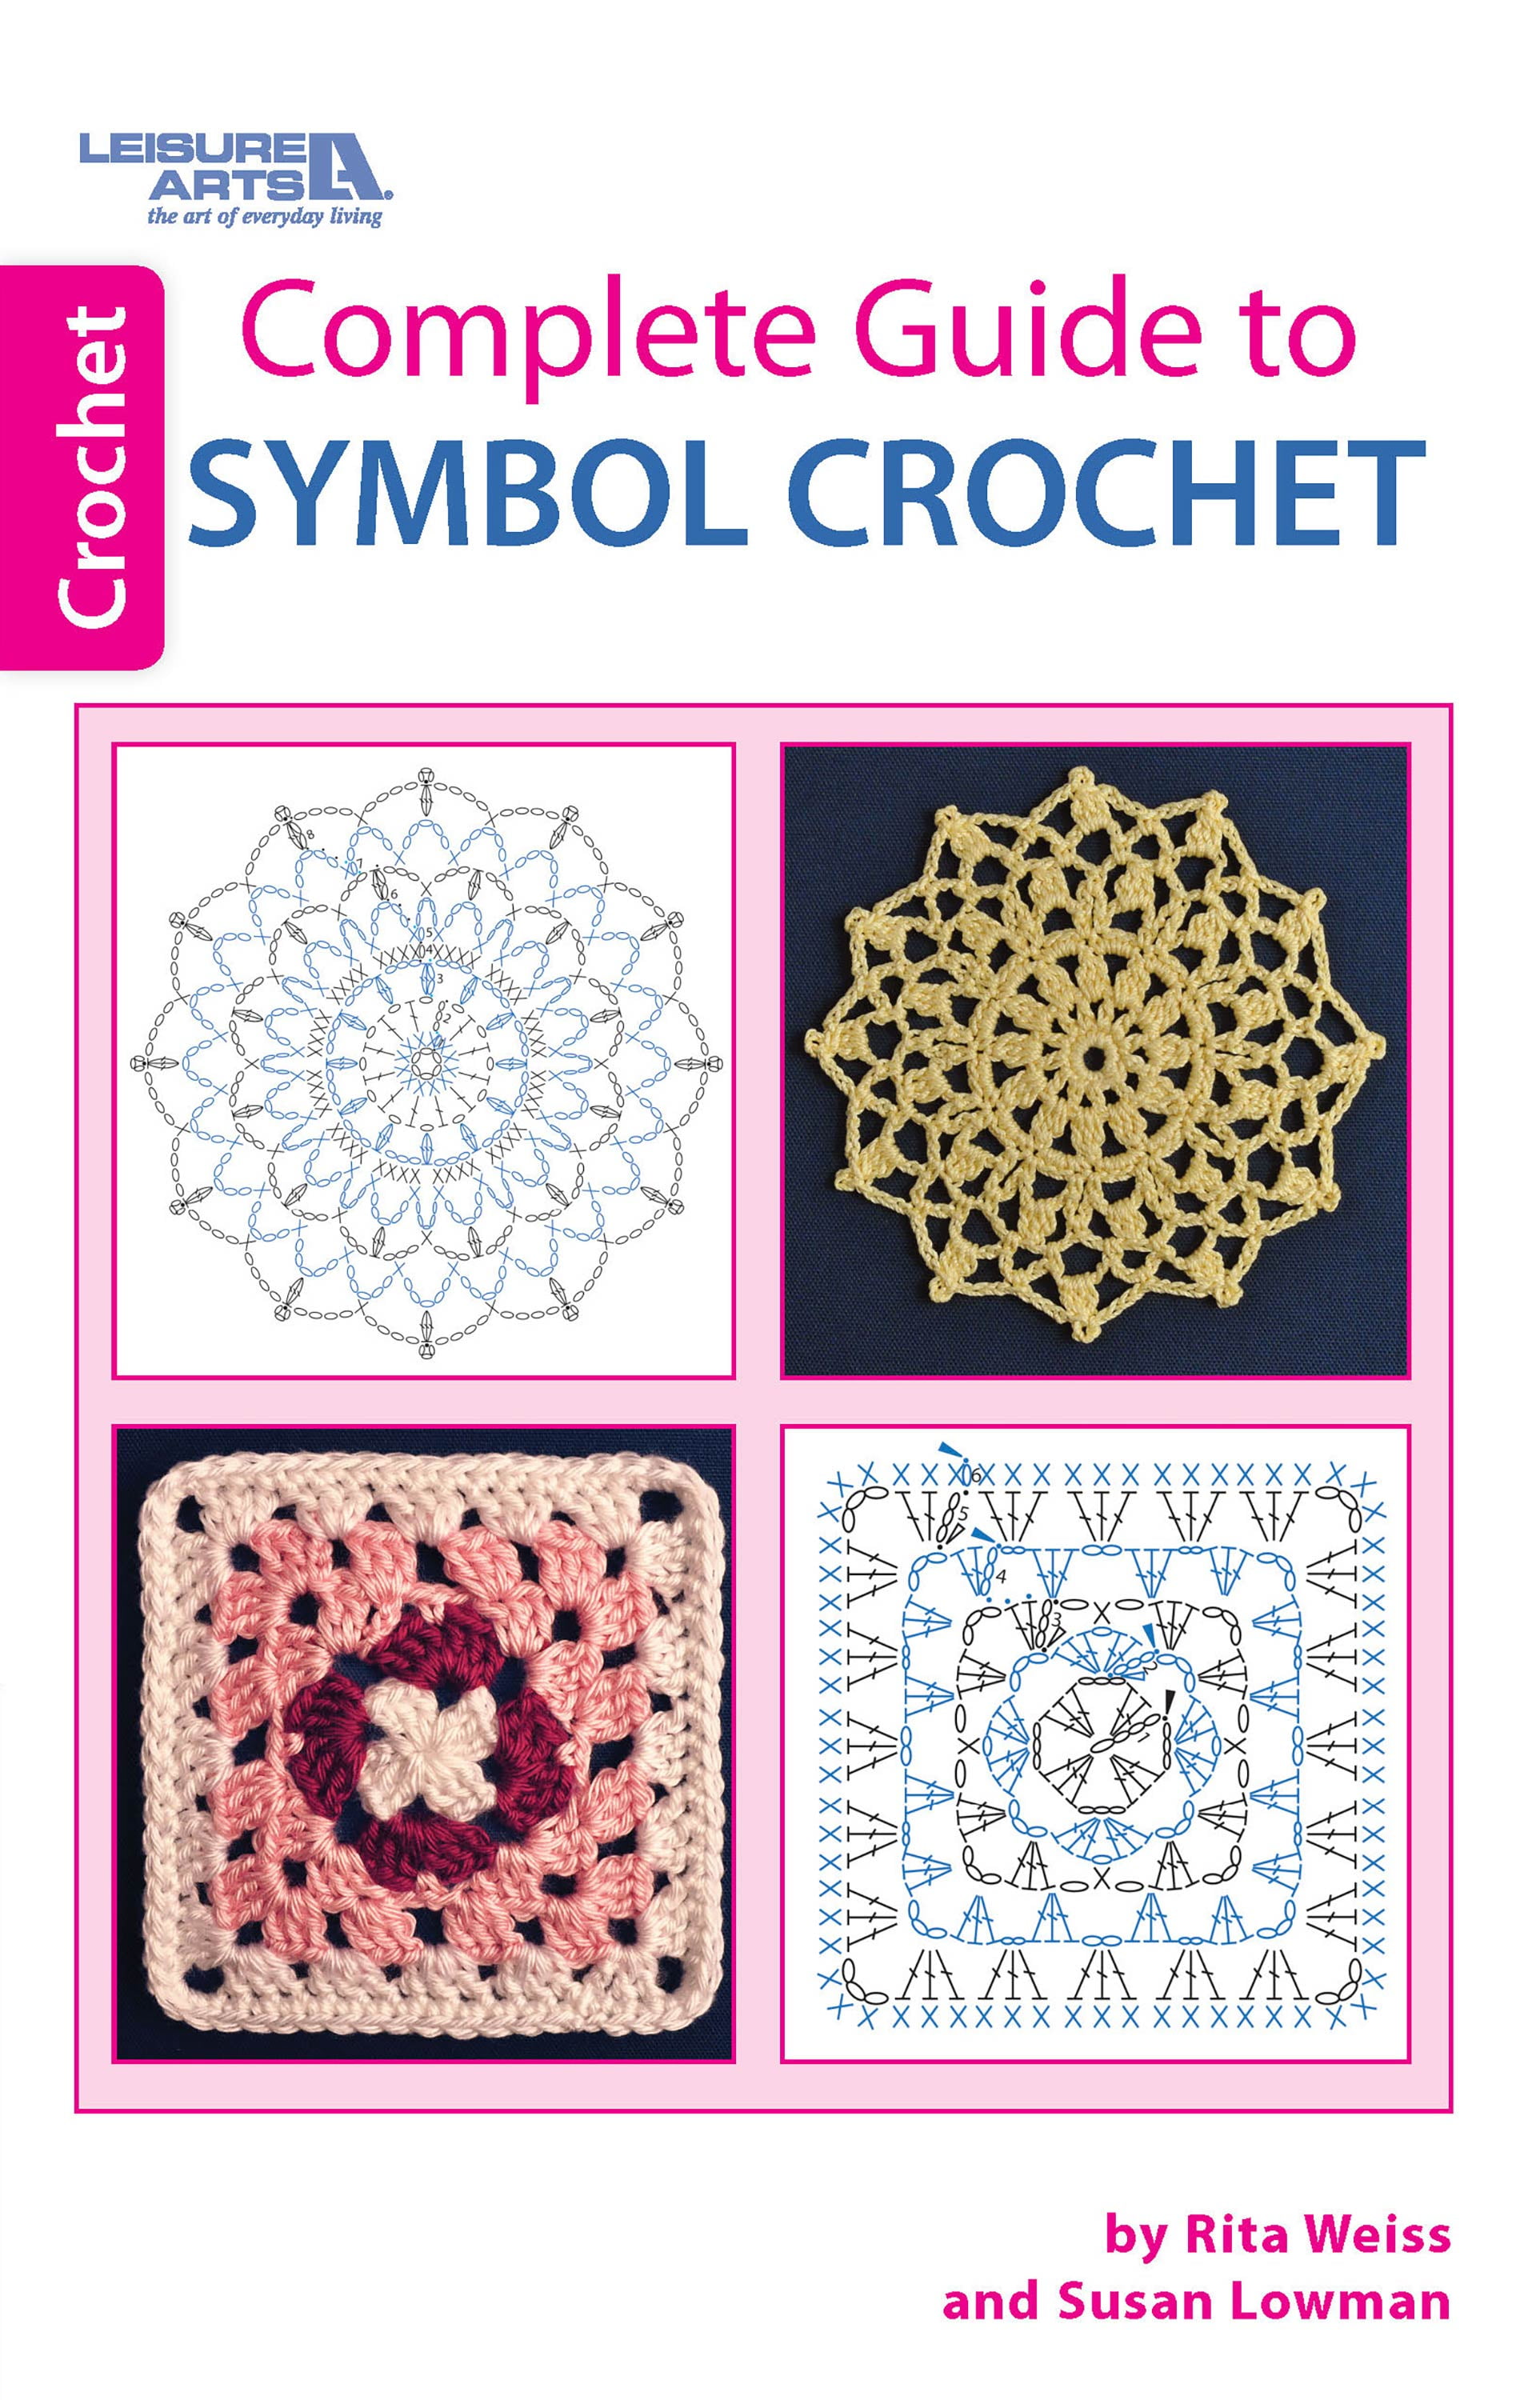 How Serendipity Led me to Write my First Crochet Books Review. - Carroway  Crochet crochet books from my library